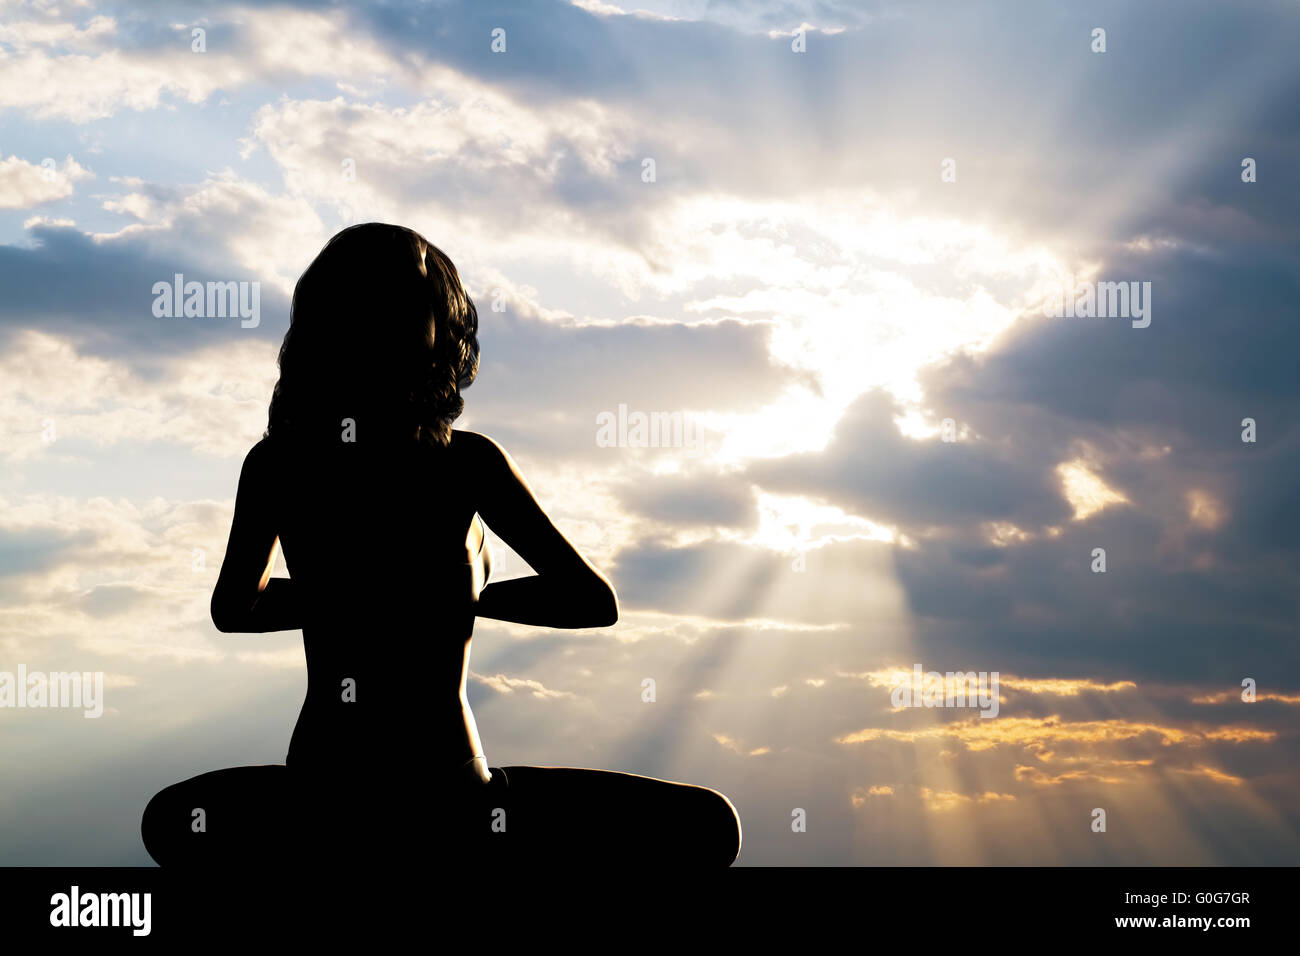 A silhouette of a woman sitting in yoga position Stock Photo